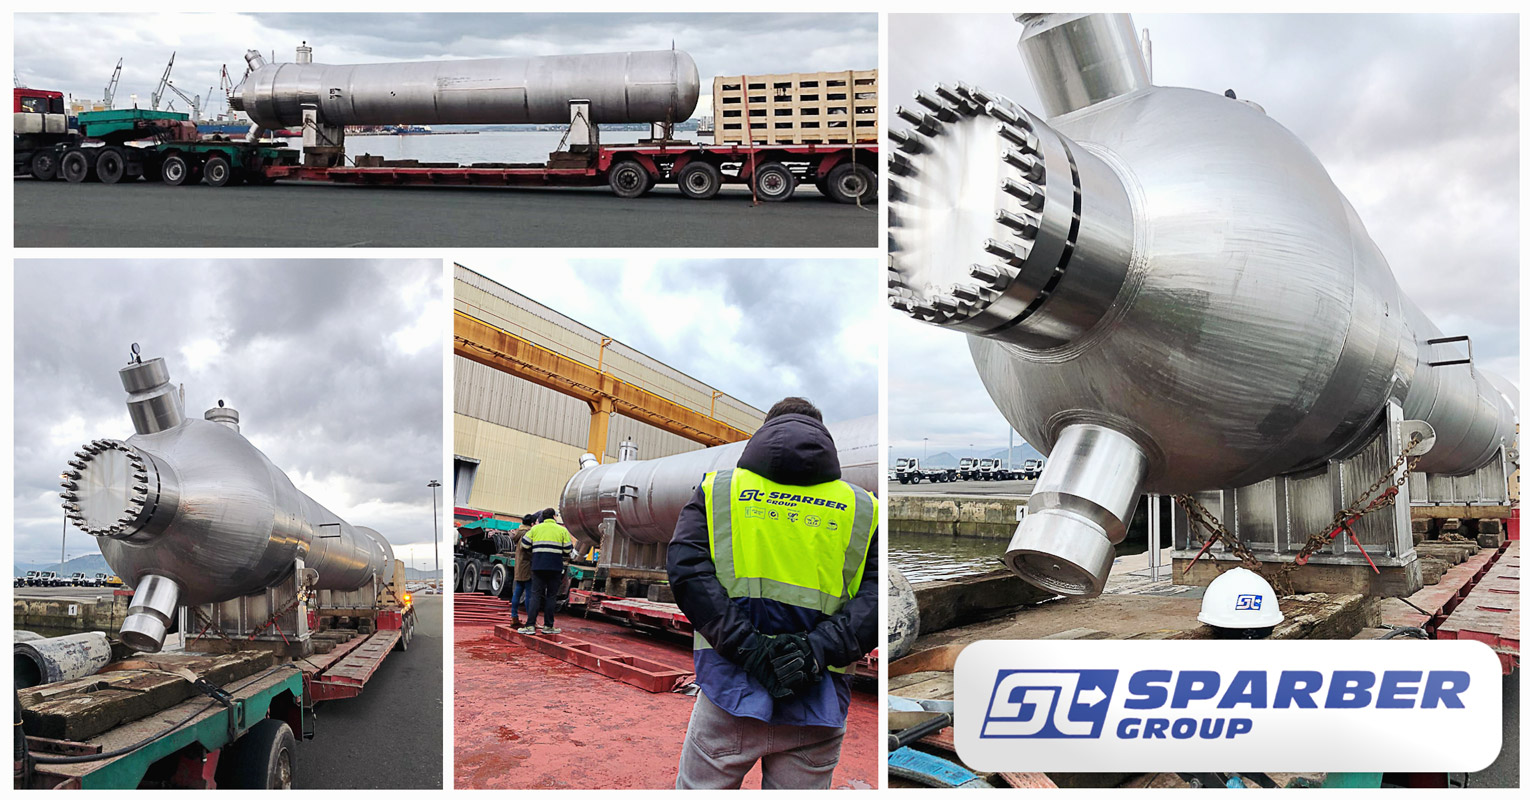 Sparber Moved 14m Long Pressure Vessels Weighing 80mt each